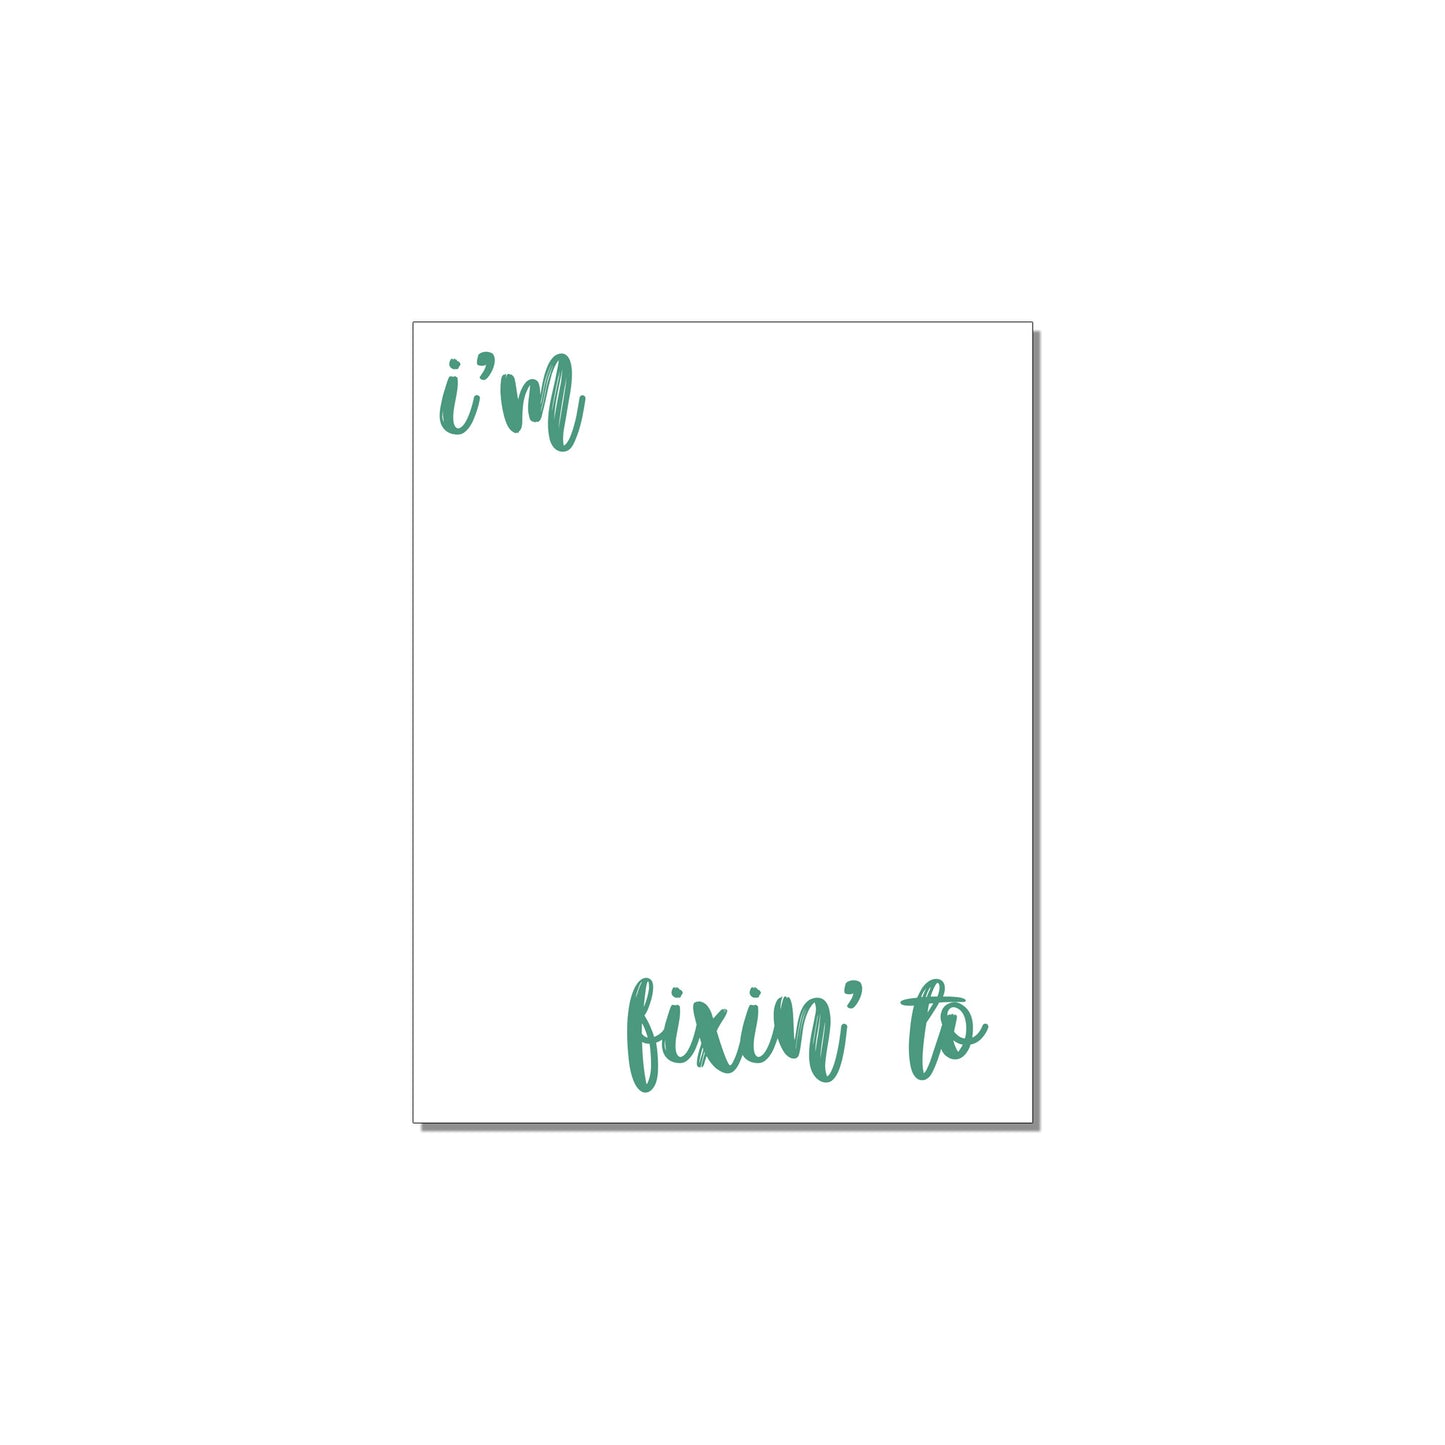 OH, MY STARS! SOUTHERN SASS NOTEPADS